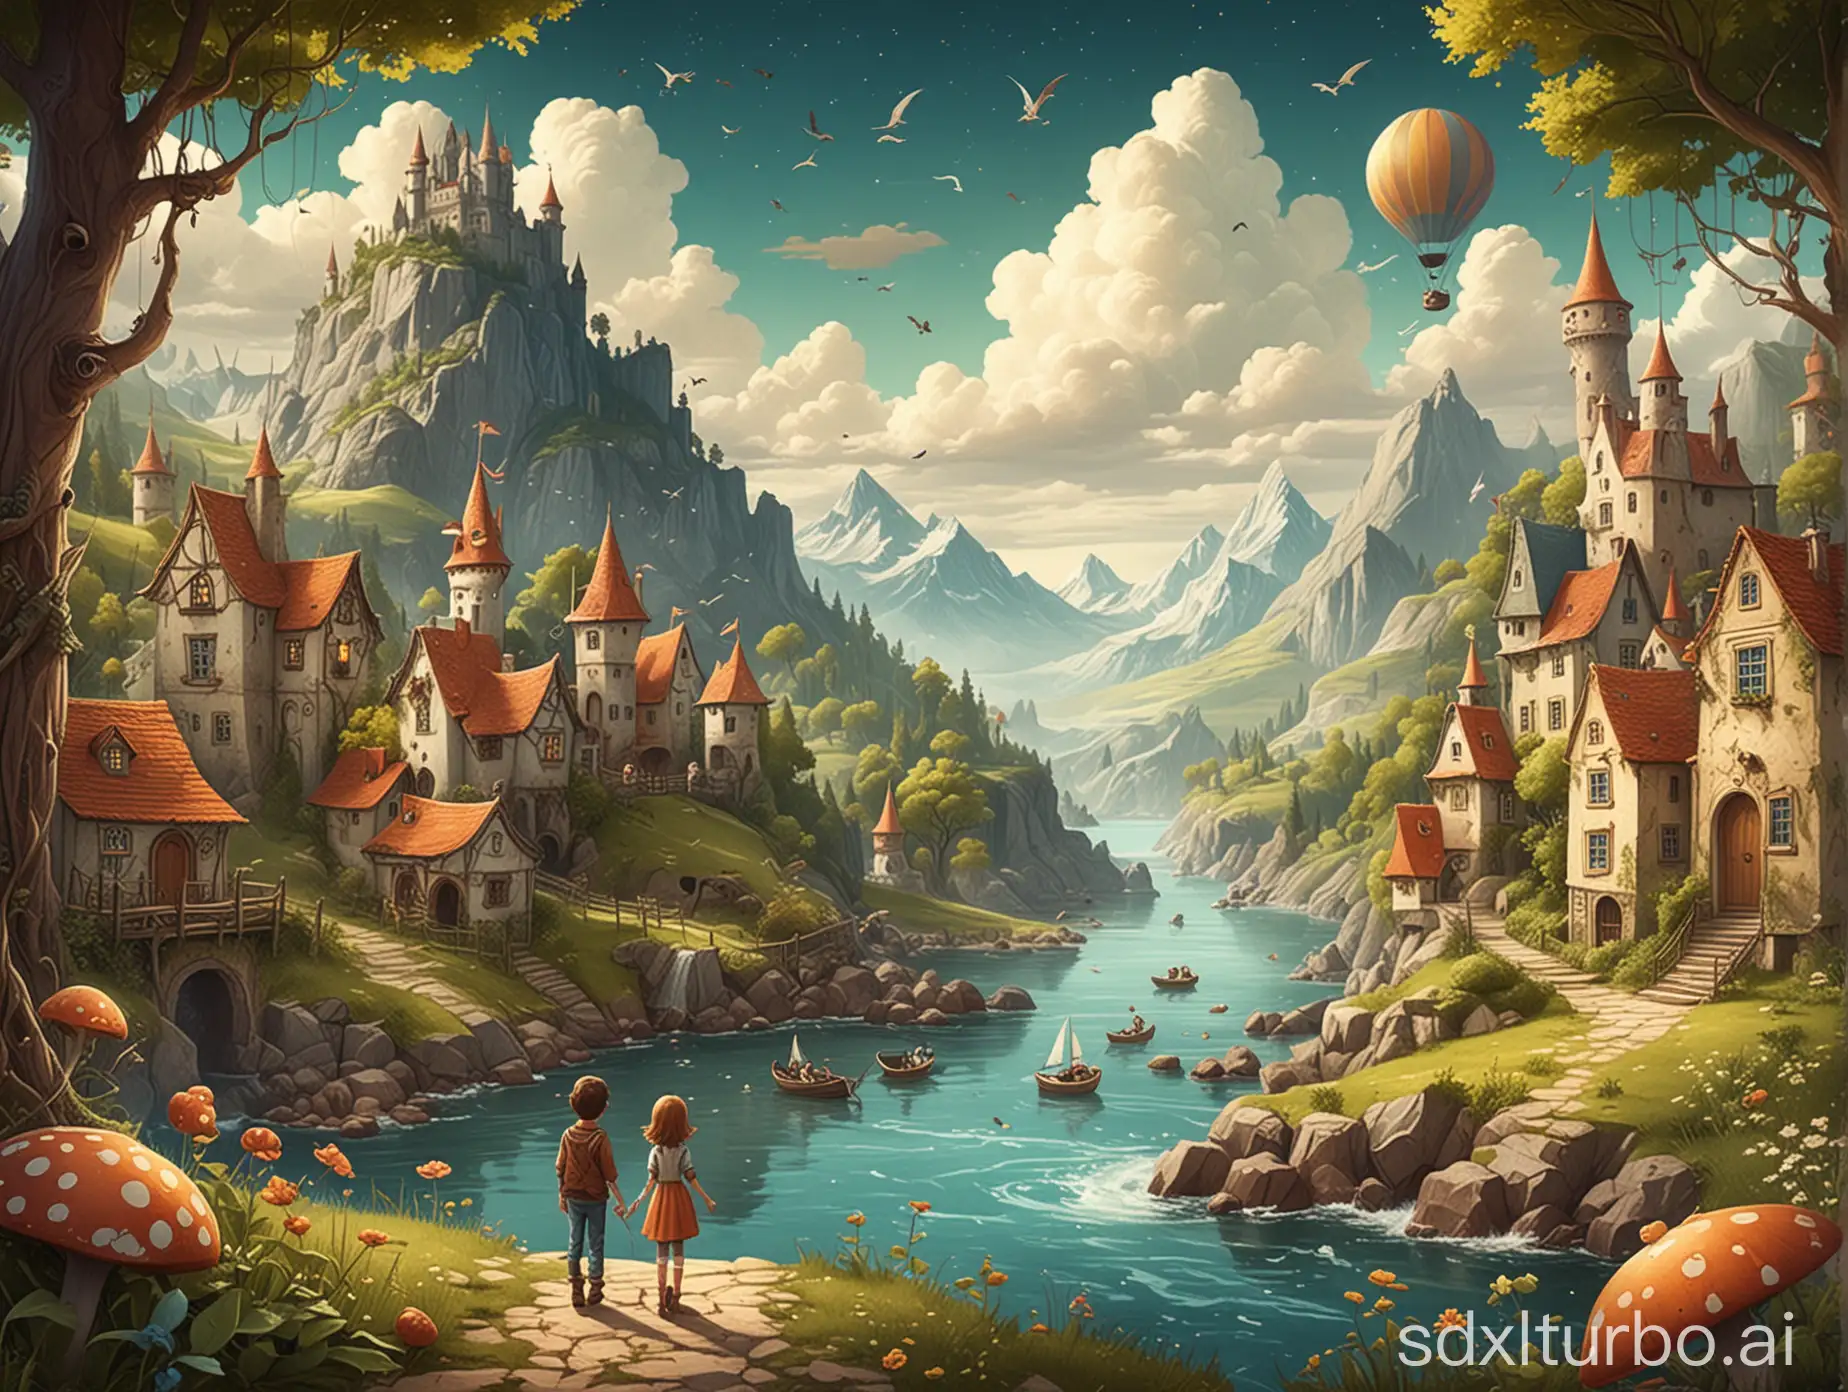 Create illustrations that could belong in a magical children's book, filled with whimsical characters and fantastical landscapes.